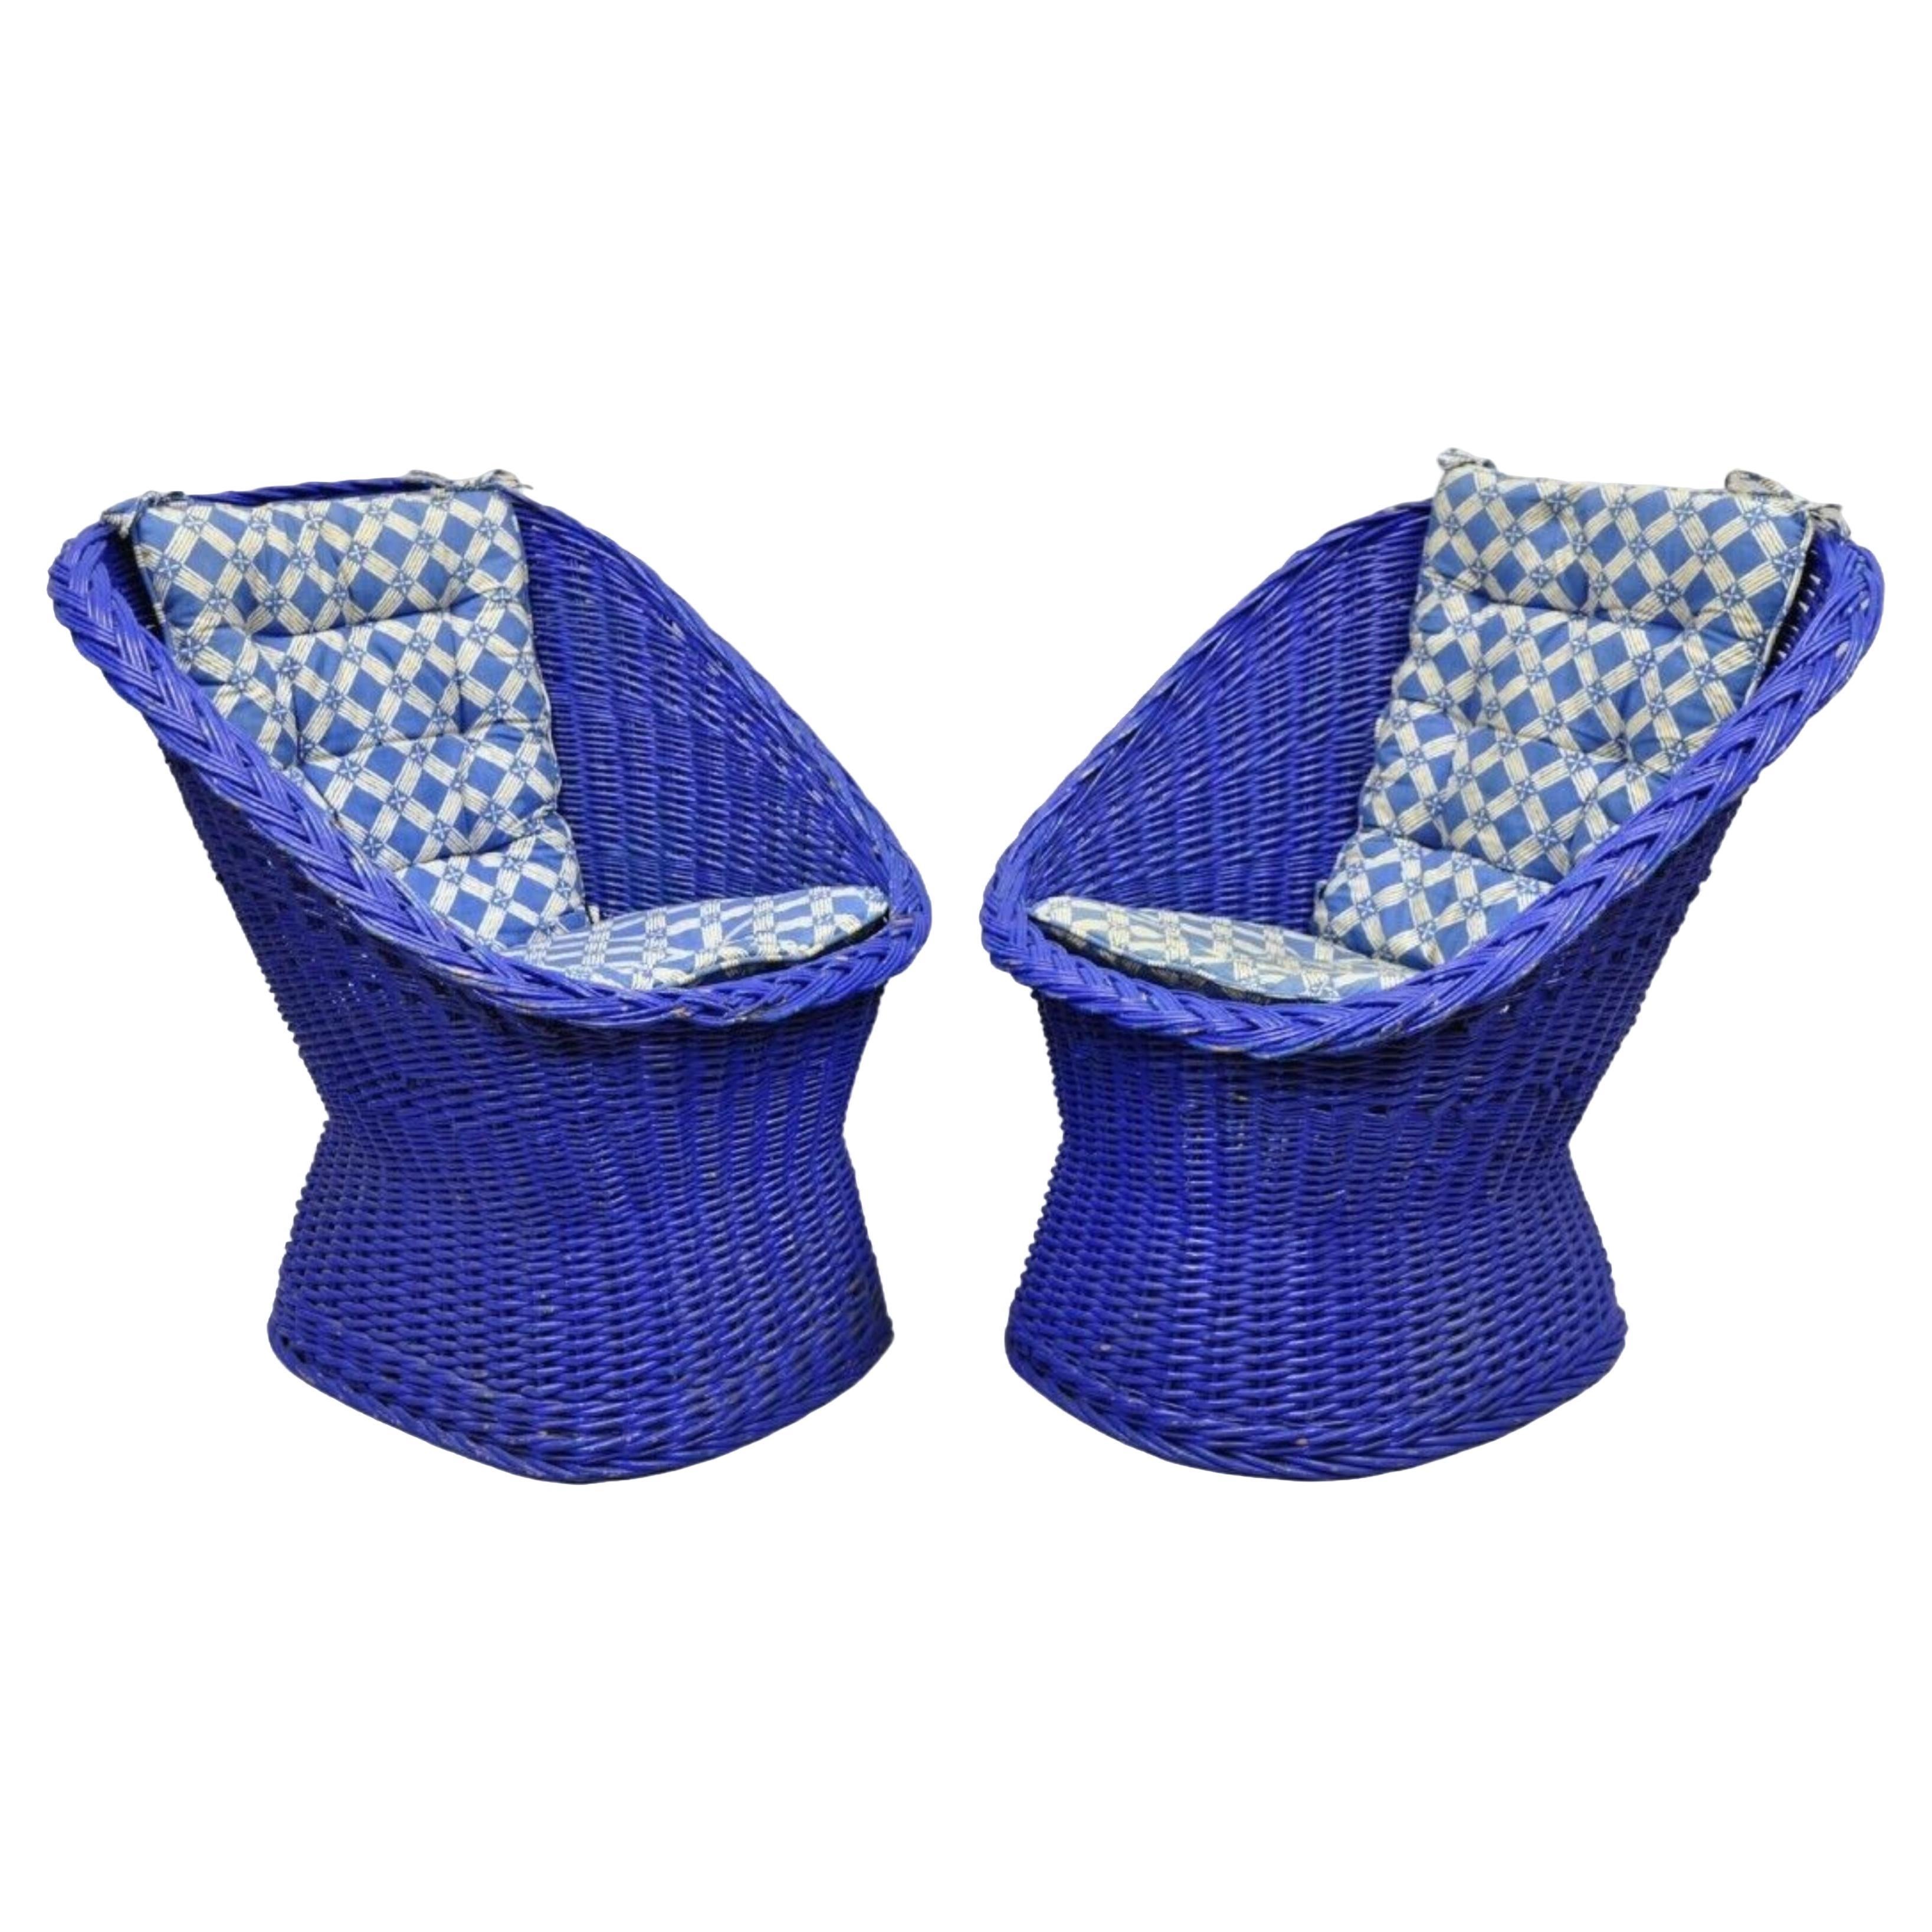 Vintage Mid Century Modern Blue Painted Wicker Rattan Pod Club Chairs - a Pair For Sale